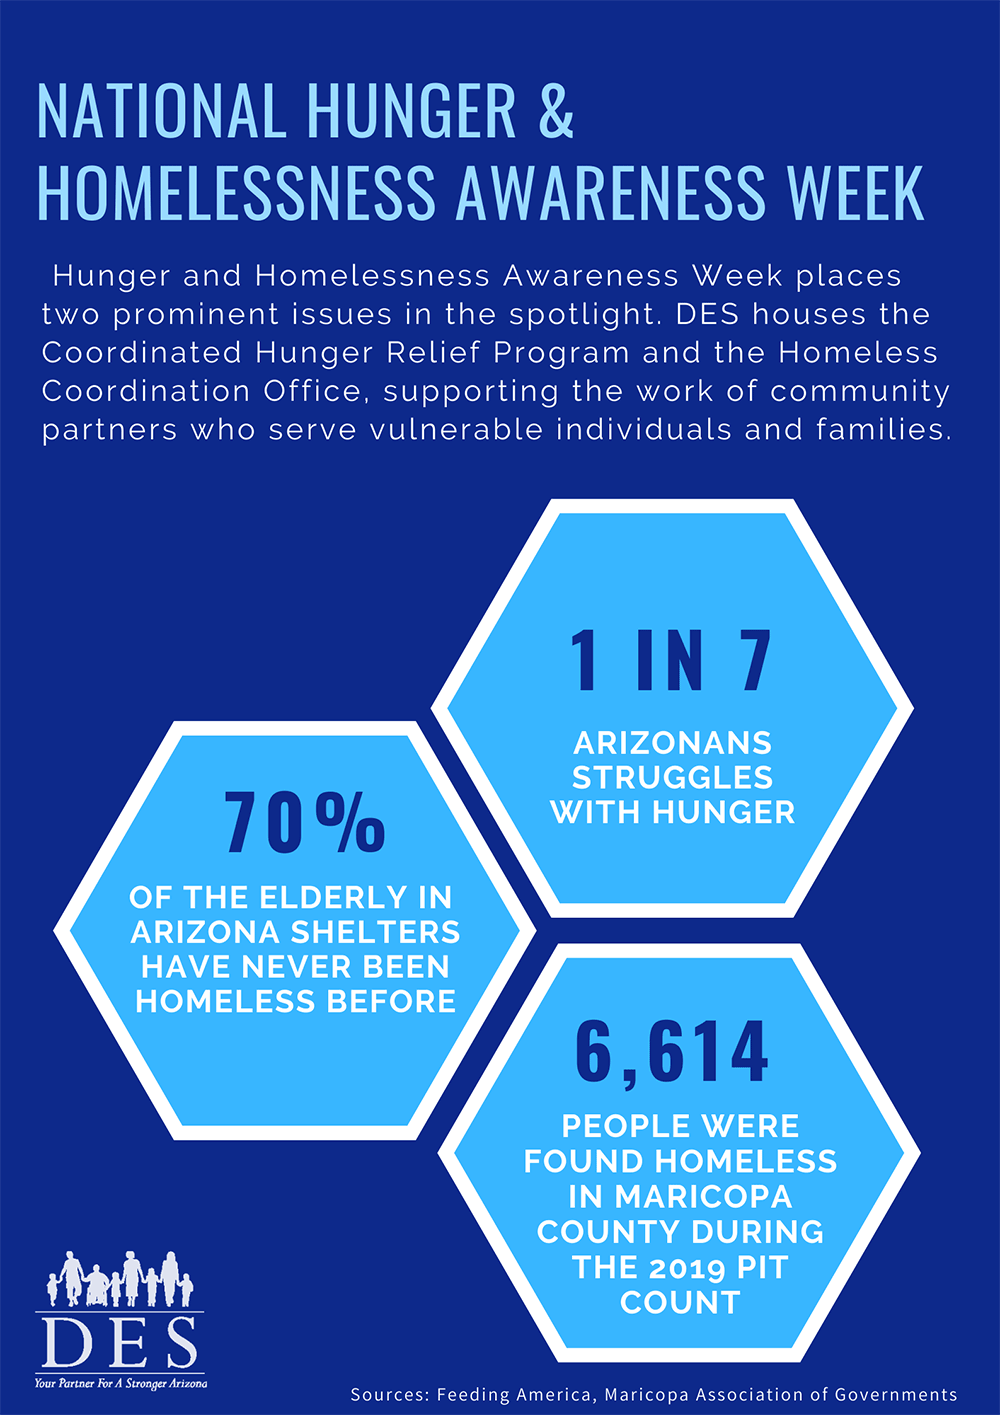 Facts and figures about hunger and homelessness awareness